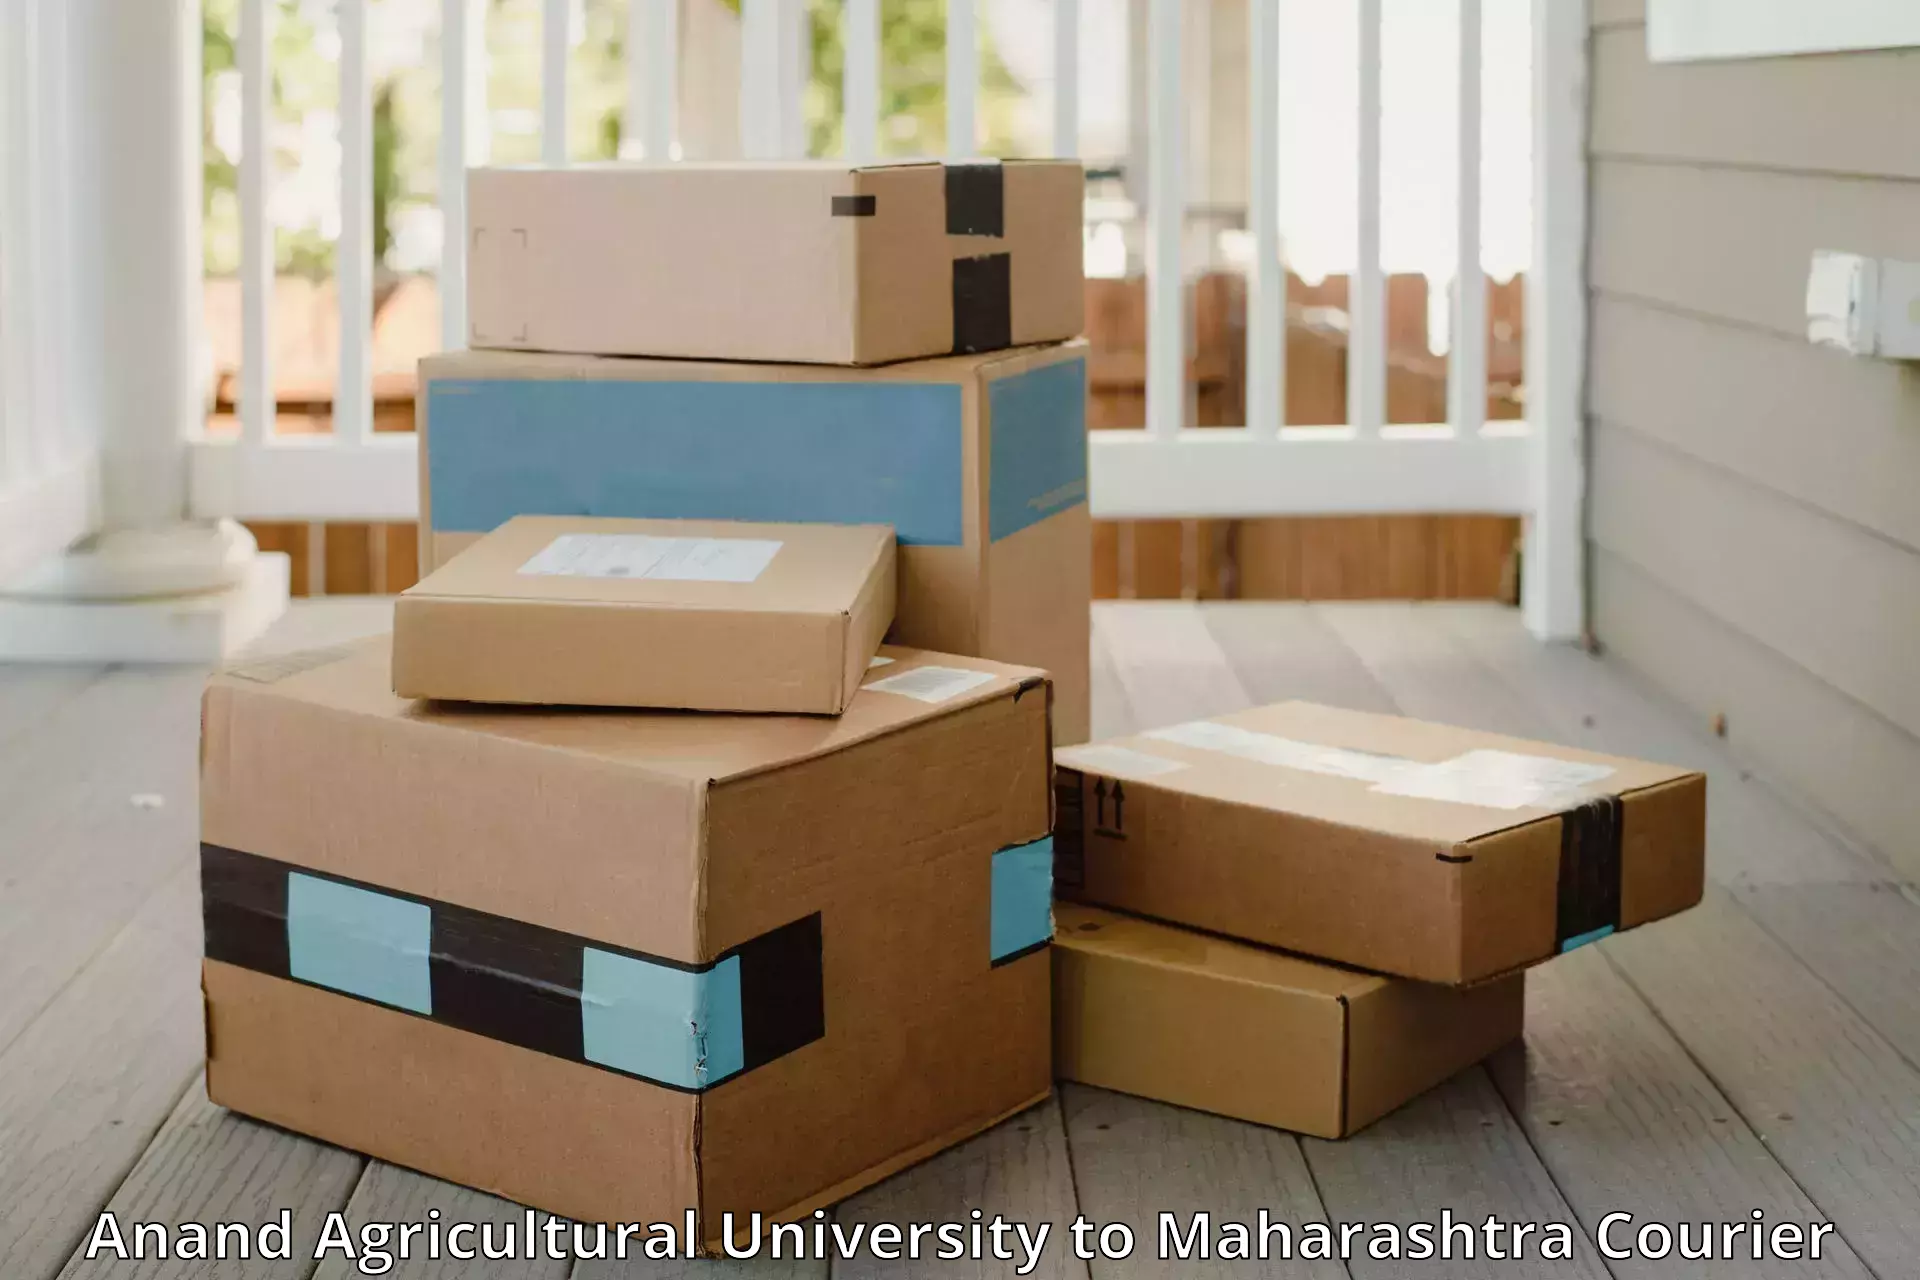 Luggage forwarding service Anand Agricultural University to Phaltan